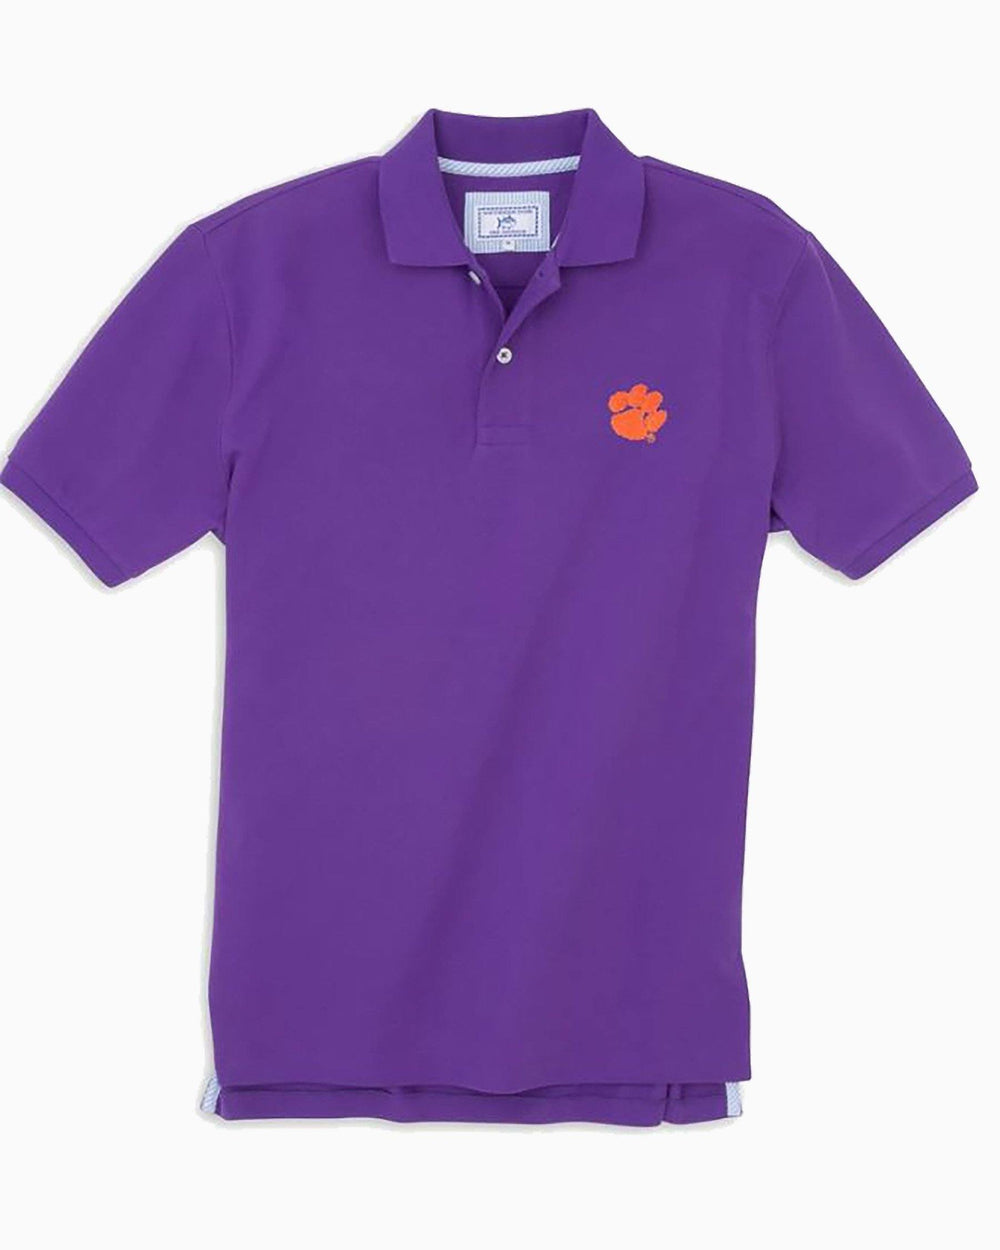 The front view of the Men's Purple Clemson Tigers Pique Polo Shirt by Southern Tide - Regal Purple